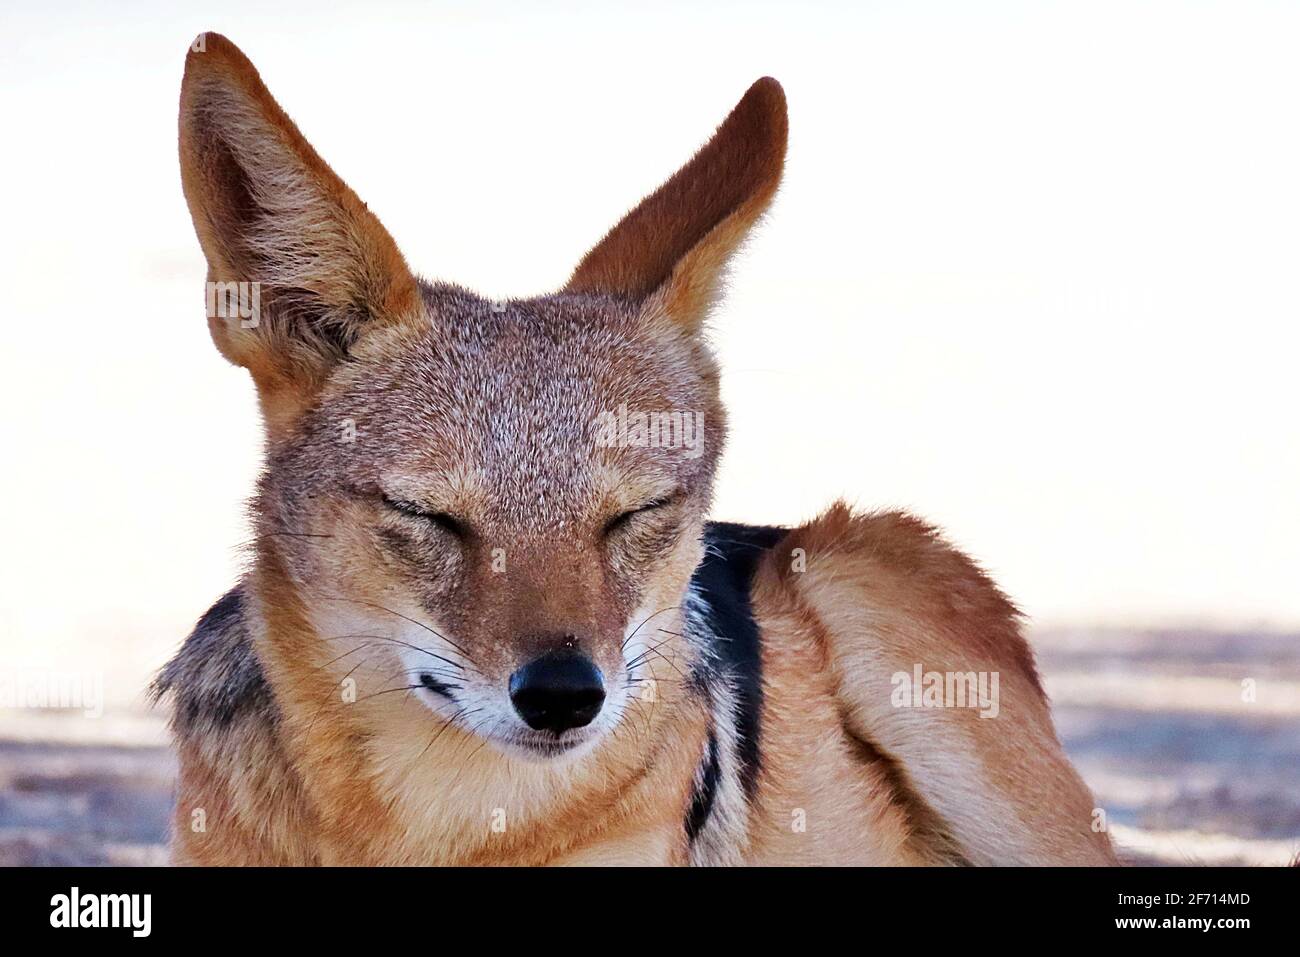 A Black Backed Jackal (Canis mesomelas) taking shade from the midday sun at Sossusvlei, Namibia Stock Photo